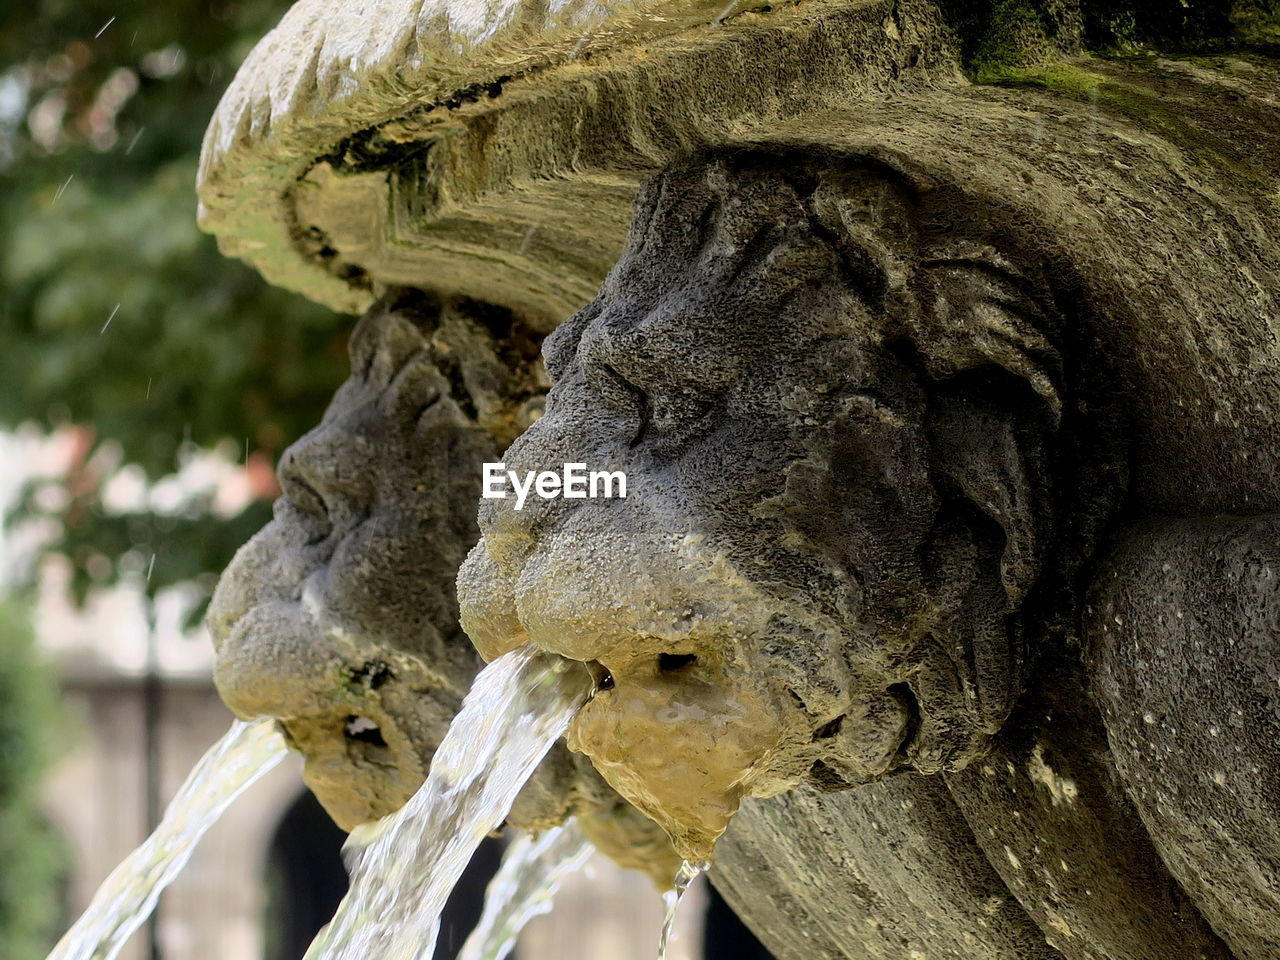 Close-up of stone lions